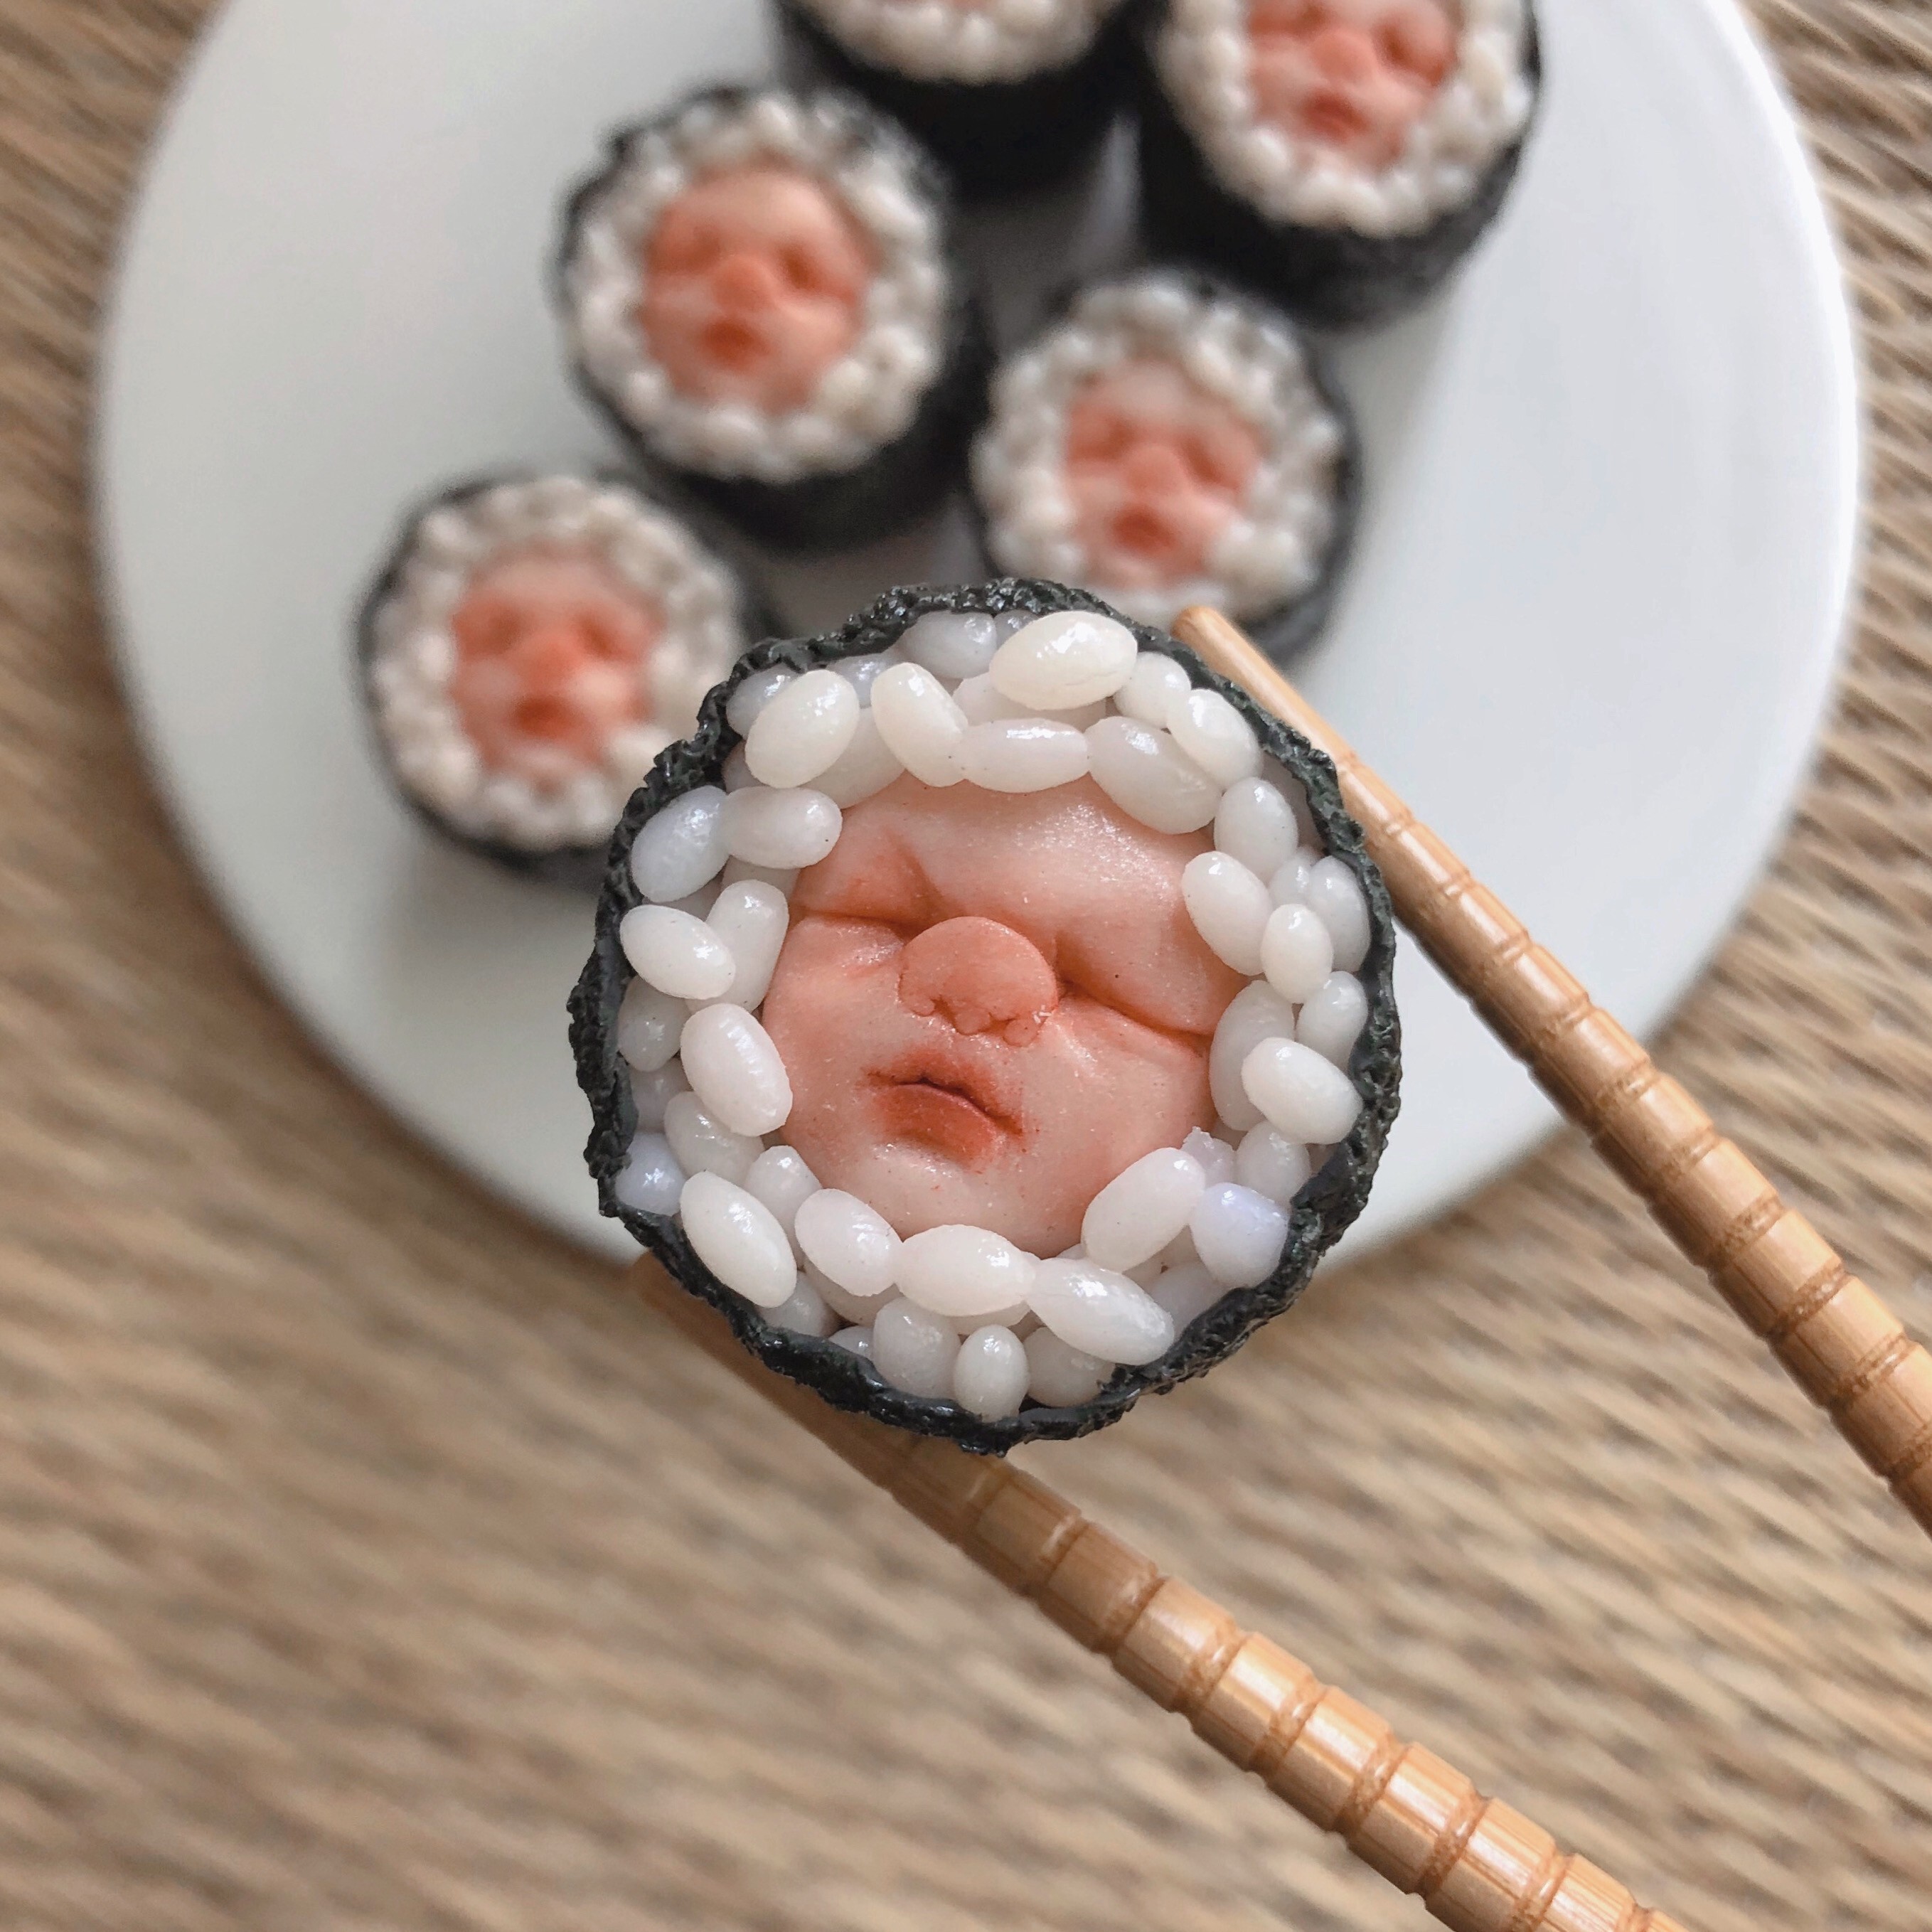 Sushi models featuring baby heads made of polymer clay by Singaporean artist Qixuan Lim. The sculptor’s works have won her hordes of Instagram fans. Photo: Courtesy of the artist